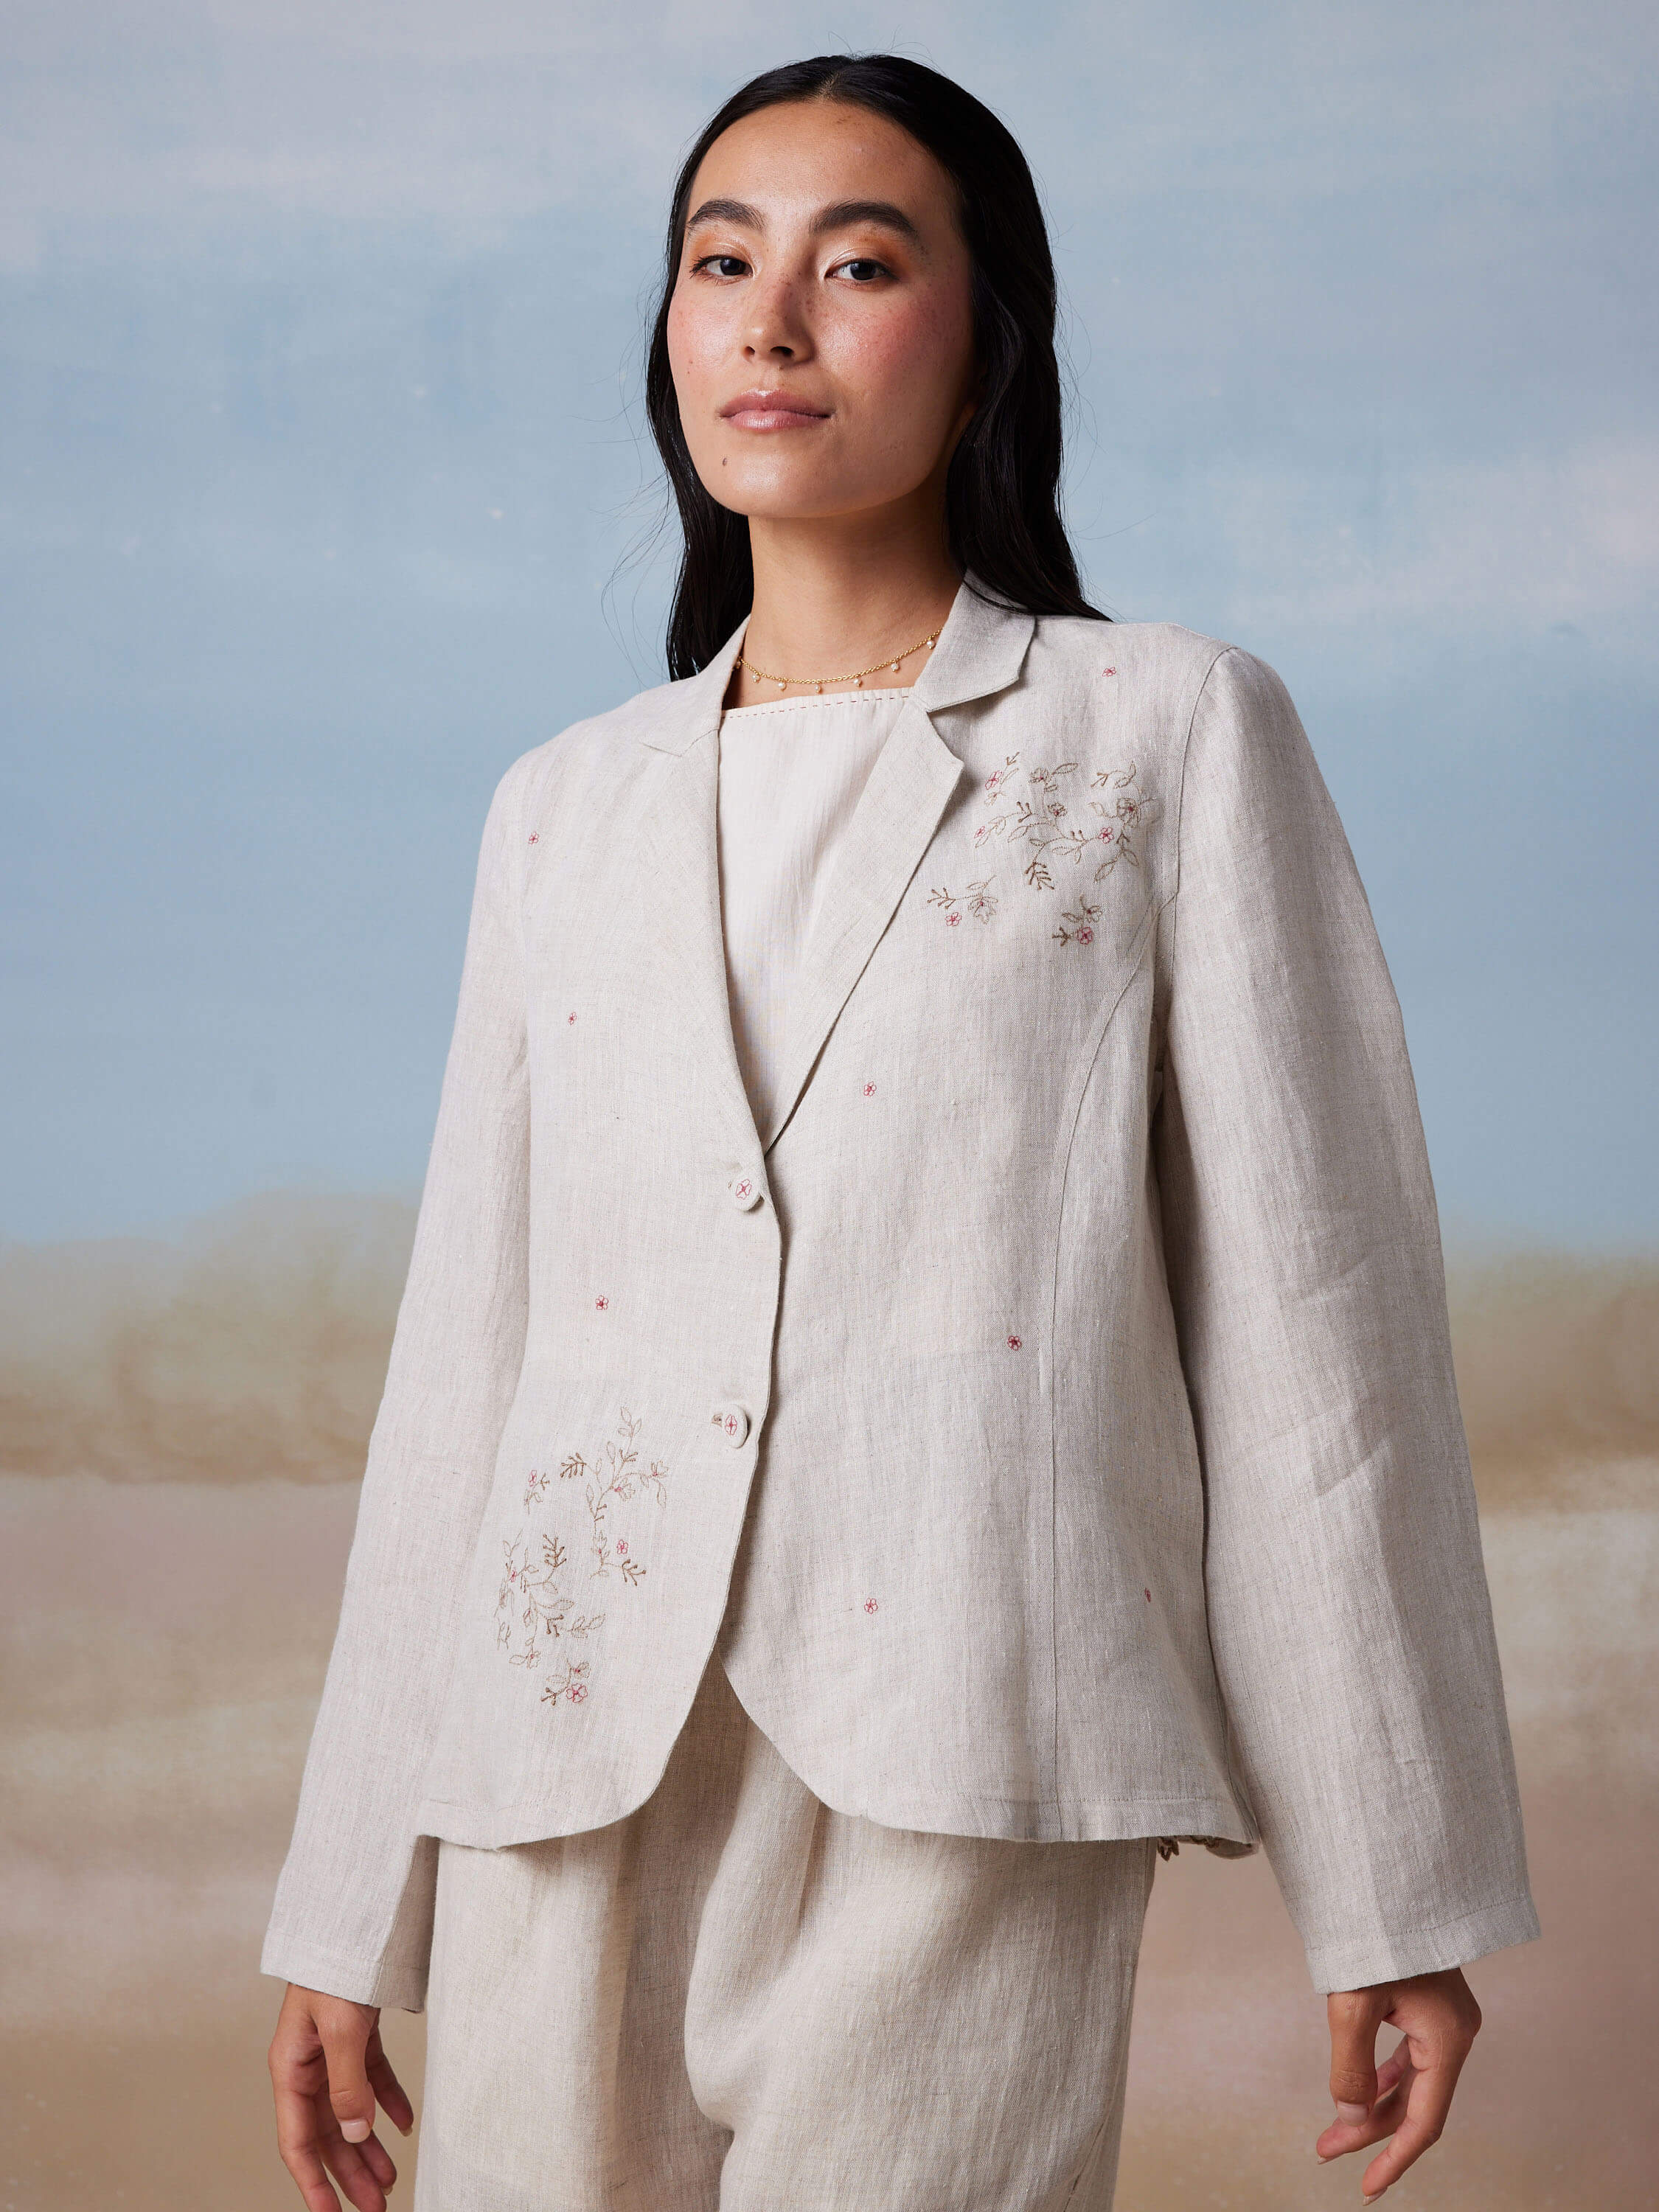 Woman wearing a light embroidered suit standing against a soft background.